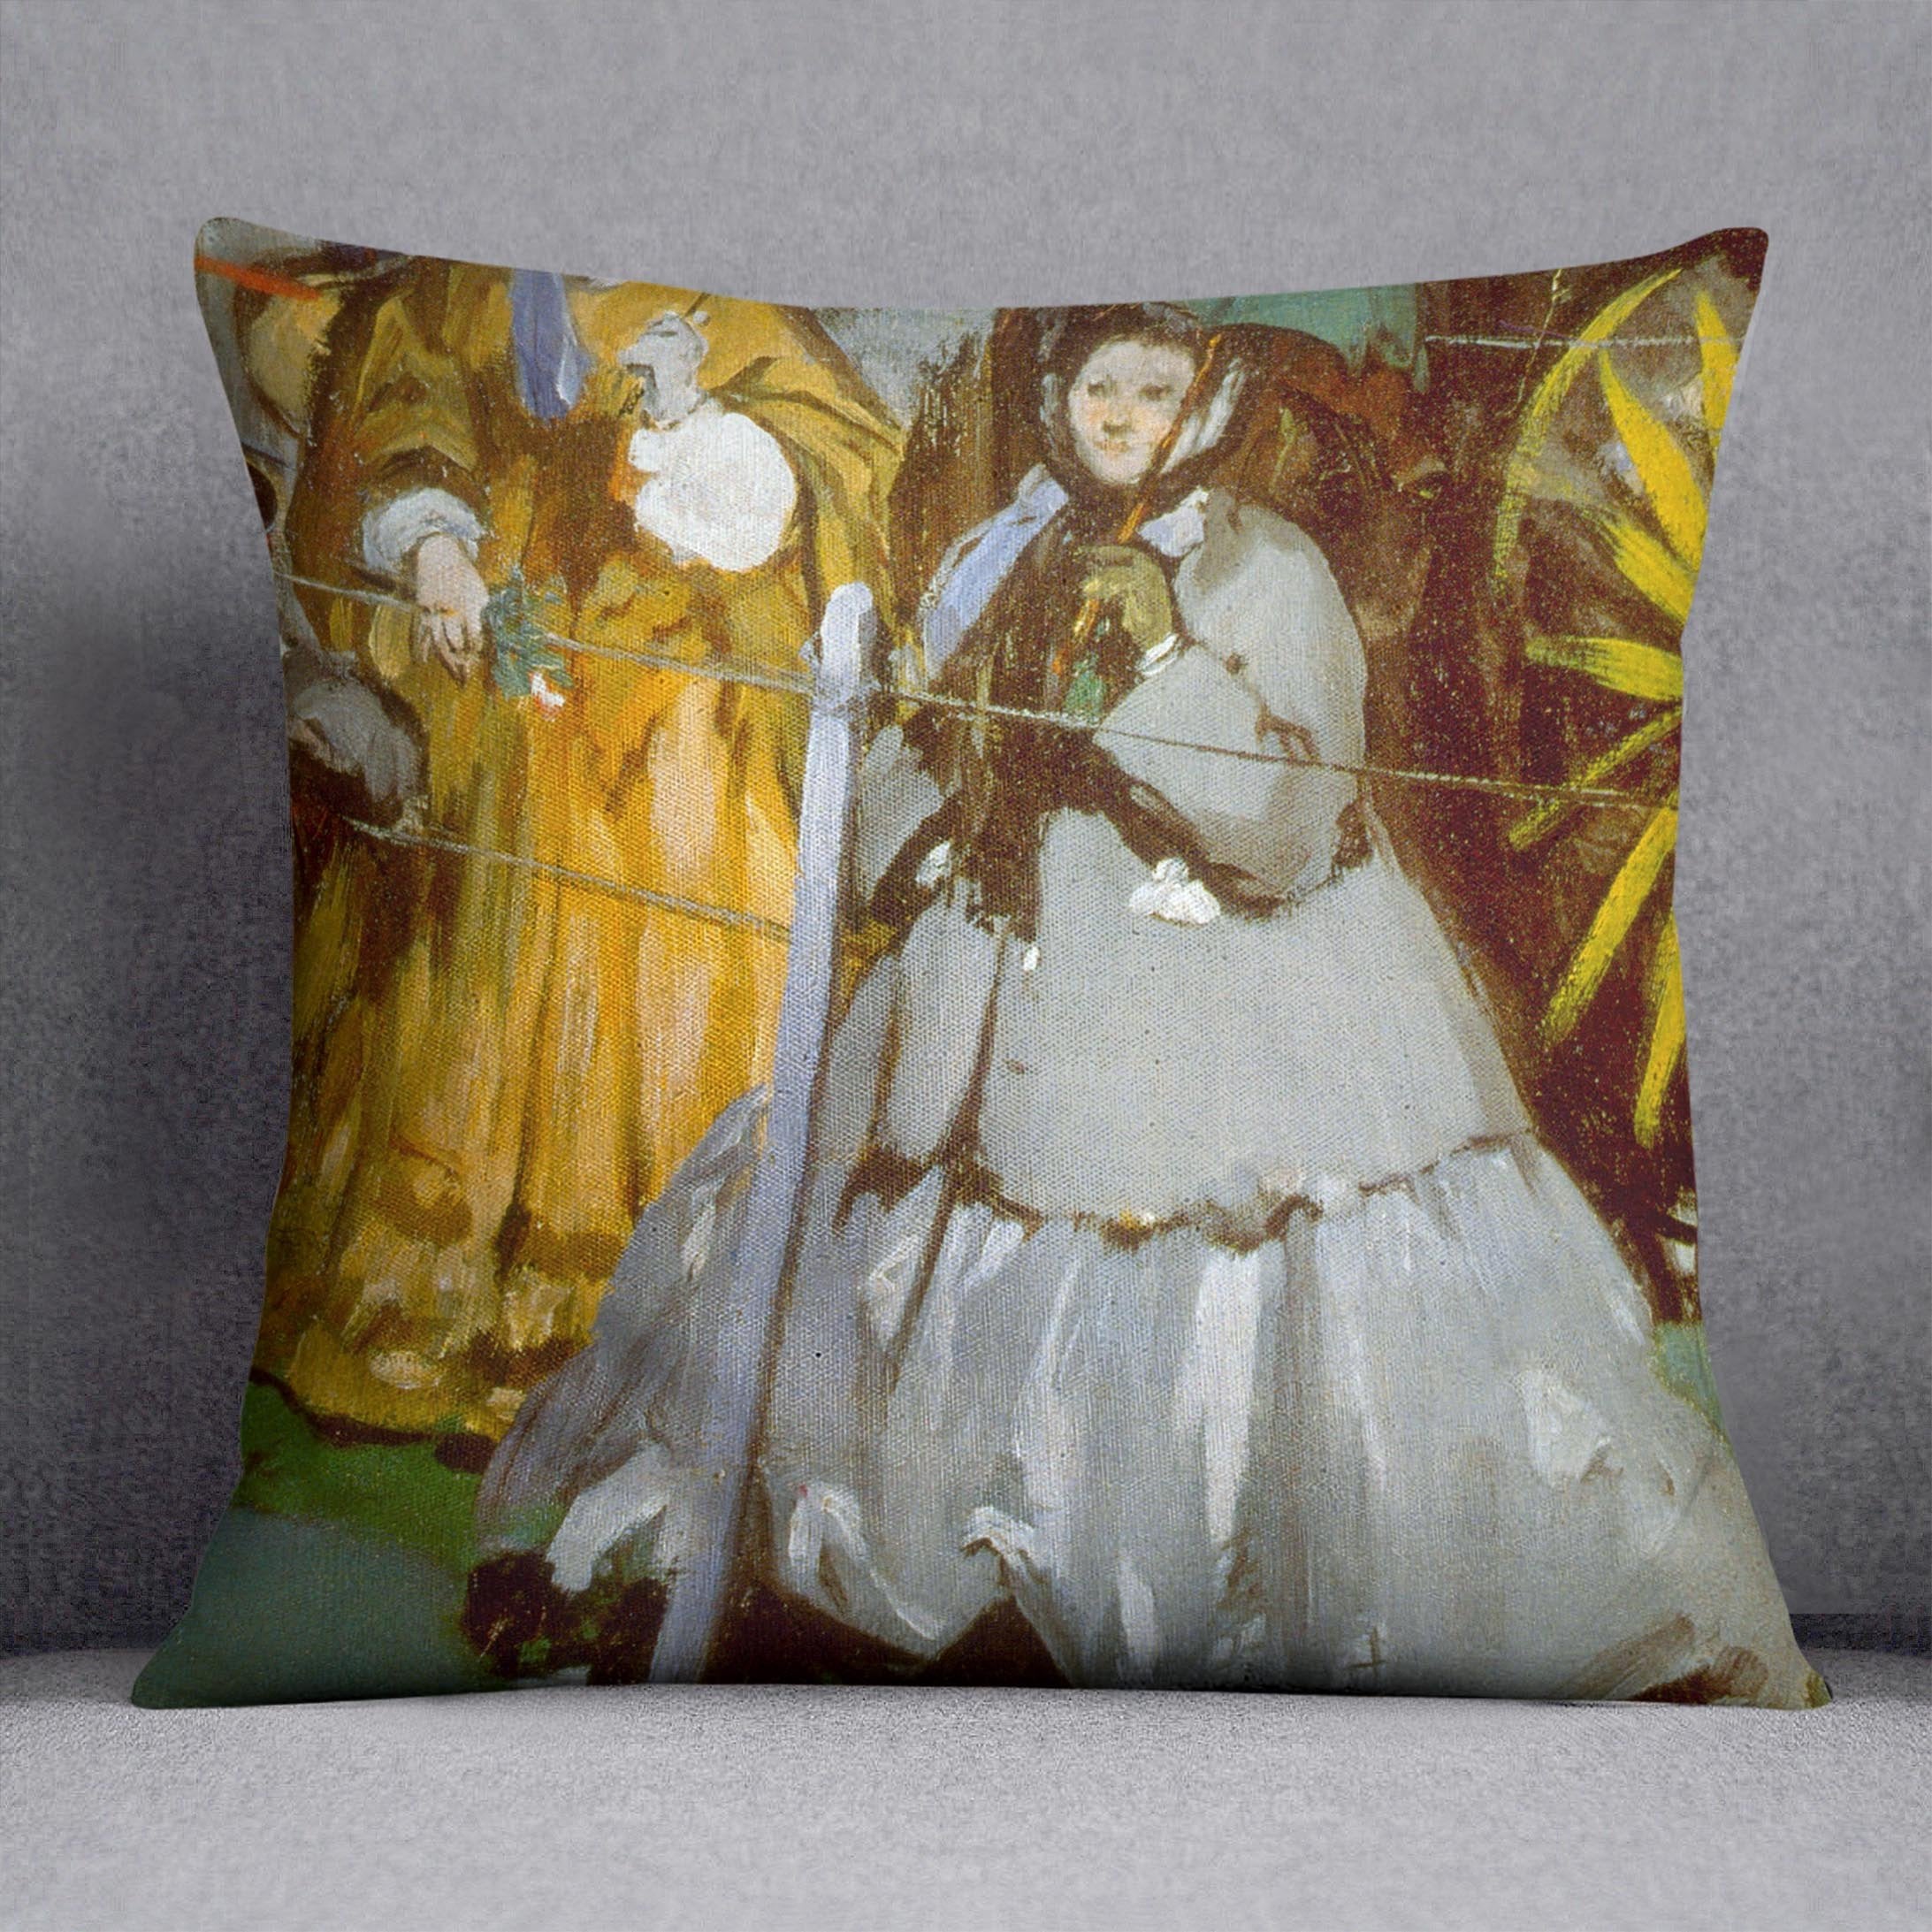 Racecourse by Manet Throw Pillow